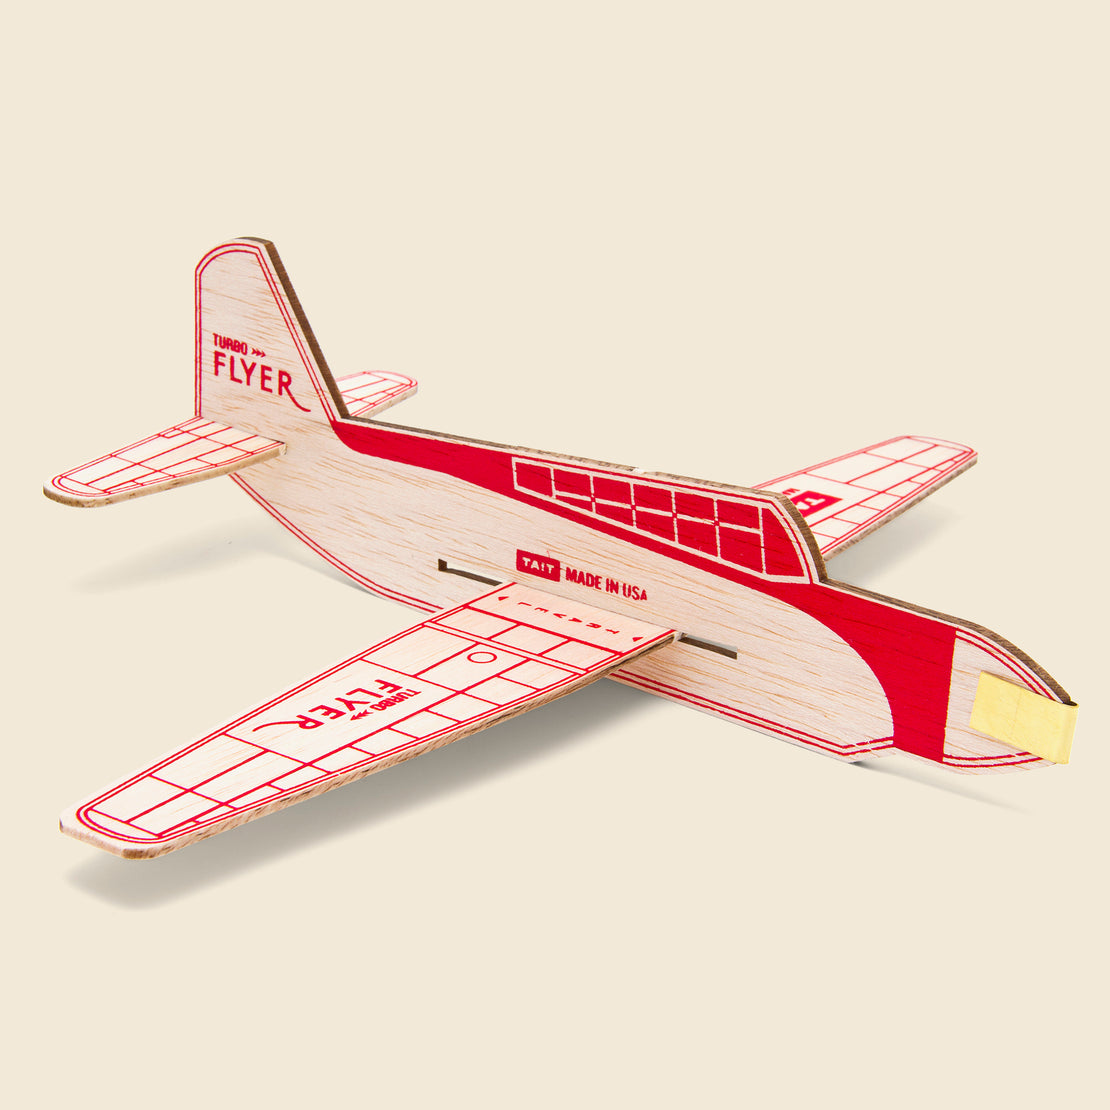 Home Turbo Flyer Balsa Airplane Kit - Red